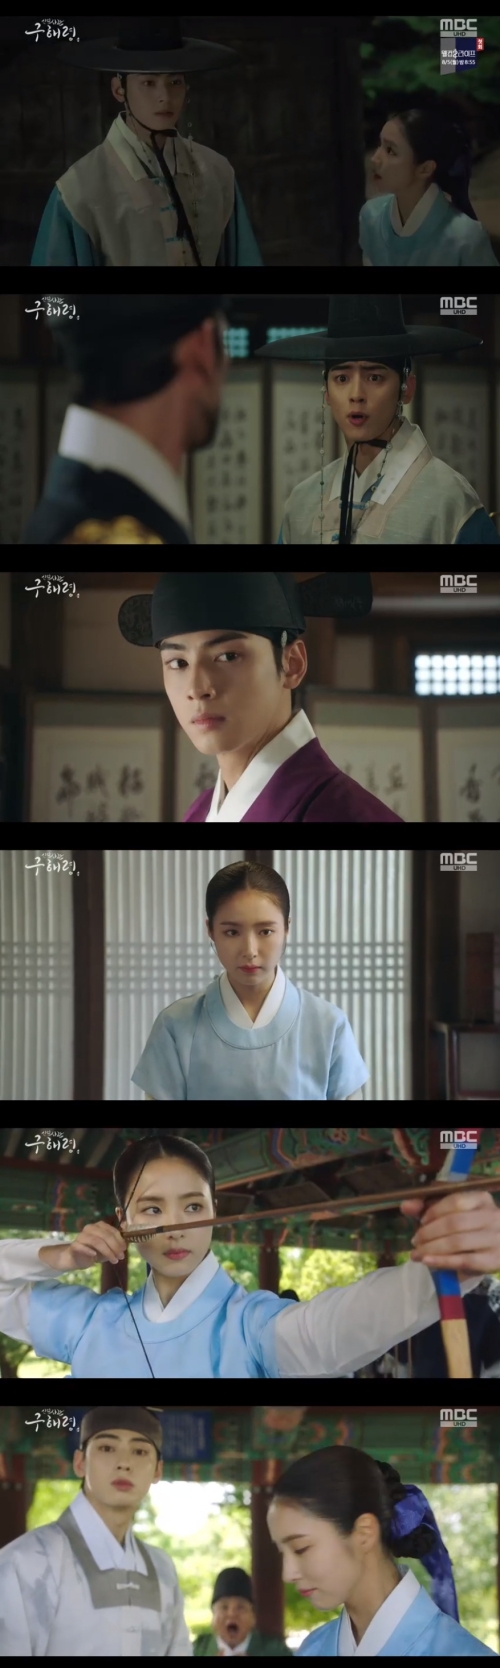 Na Hae-ryung, the new officer, Jung Eun-woo, revealed to Shin Se-kyung.In the 9th and 10th MBC drama Na Hae-ryung, which was broadcast on the 31st, Na Hae-ryung (Shin Se-kyung) knew the identity of Lee Rim (Jung Eun-woo).On this day, Na Hae-ryung witnessed Irim being threatened by an assassin; he was embarrassed by the unexpected situation and picked up a piece of wood nearby and was wary.At this time, Irim asked the assassin, I am the prince of the Joseon Dynasty, and can you really hurt me?When Irim fell into Danger, an unidentified arrow flew between the Irim and the assassin, and while the arrow shooter was at the Assassin and Daechi station, Irim fell unconscious.Na Hae-ryung dragged a fainted lim to the pharmacy.The pharmacist seemed to be a precious person when he saw the appearance of Irim. He asked, Is it Jungin?Lee Rim woke up afterward, and he rushed to the palace without explaining the situation to the former Na Hae-ryung, and met Lee Jin (Park Ki-woong) to tell him what he witnessed.Lee Jin was appalled by Irims Danger and nailed to stay out of work any more.Irim insisted he wanted to know about the Hodam teacher at the center of his work, but Lee Jin ordered him not to tell him anything.Meanwhile, the Ada Lovelace, including the former Na Hae-ryung, were ordered to head back to the old days by Min Woo-won (Lee Ji-hoon).Na Hae-ryung changed his position with Hearan (Jang Yubin) and focused his attention on the green-colored party where Daewon Daegun Irim is located.Heo Sam-bo (Seongjiru) scrambling to hide his identity, but Irim said, Even if you can deceive the eunja, you should not deceive the officer.I do not want to deceive anymore, he said, appearing in front of Na Hae-ryung in the form of Daewon Daegun, not plum.Na Hae-ryung bitterly told himself, I wished I hadnt. He told Irim, who was trying to explain to him what had happened the day before, Mama.I am seeing Mama as a cadet now. As a cadet, I focused on writing down the words of Irim.But Irim ended up blocking Na Hae-ryung.When asked what Na Hae-ryung wanted to say now and ask for forgiveness, Irim said, I wanted to say thank you.Lee said, And I have deceived you first, so I do not have to ask for forgiveness. Lets say that the evil between us is over.Then Na Hae-ryung said, I thought I might be a friend, he said. Why did not you tell me before?Later, Na Hae-ryung was surrounded by Ada Lovelace, covering the authenticity of the Dowon armys rumors.He asked Daewon Daejun to deny it if anyone talks badly, and added, Please tell him that his personality is only a little dirty.Later, Na Hae-ryung did his job as a cadet to Lee Jin, not Lee Lim.Lee Jin praises I look good in my uniform, and Lee said, It is a child who is not good to meet people.Lee Jin jumped up and started to win and shoot, saying, No, but Lee shot the bow conscious of Na Hae-ryung, but he dropped it on the floor and laughed.Lee said, If my skills are funny, shoot once. If you give me a shot, I will give you the authority to laugh at me.Then, Na Hae-ryung took the bow of Irim and struck him at once, and he was surprised to learn that he had grown up in Beijing as a child and learned archery.Among them, Im (Kim Yeo-jin) knew the whereabouts of Seopo. Its a left-wing thing.All of this, he said, the book became a gold medal, and the support disappeared. 